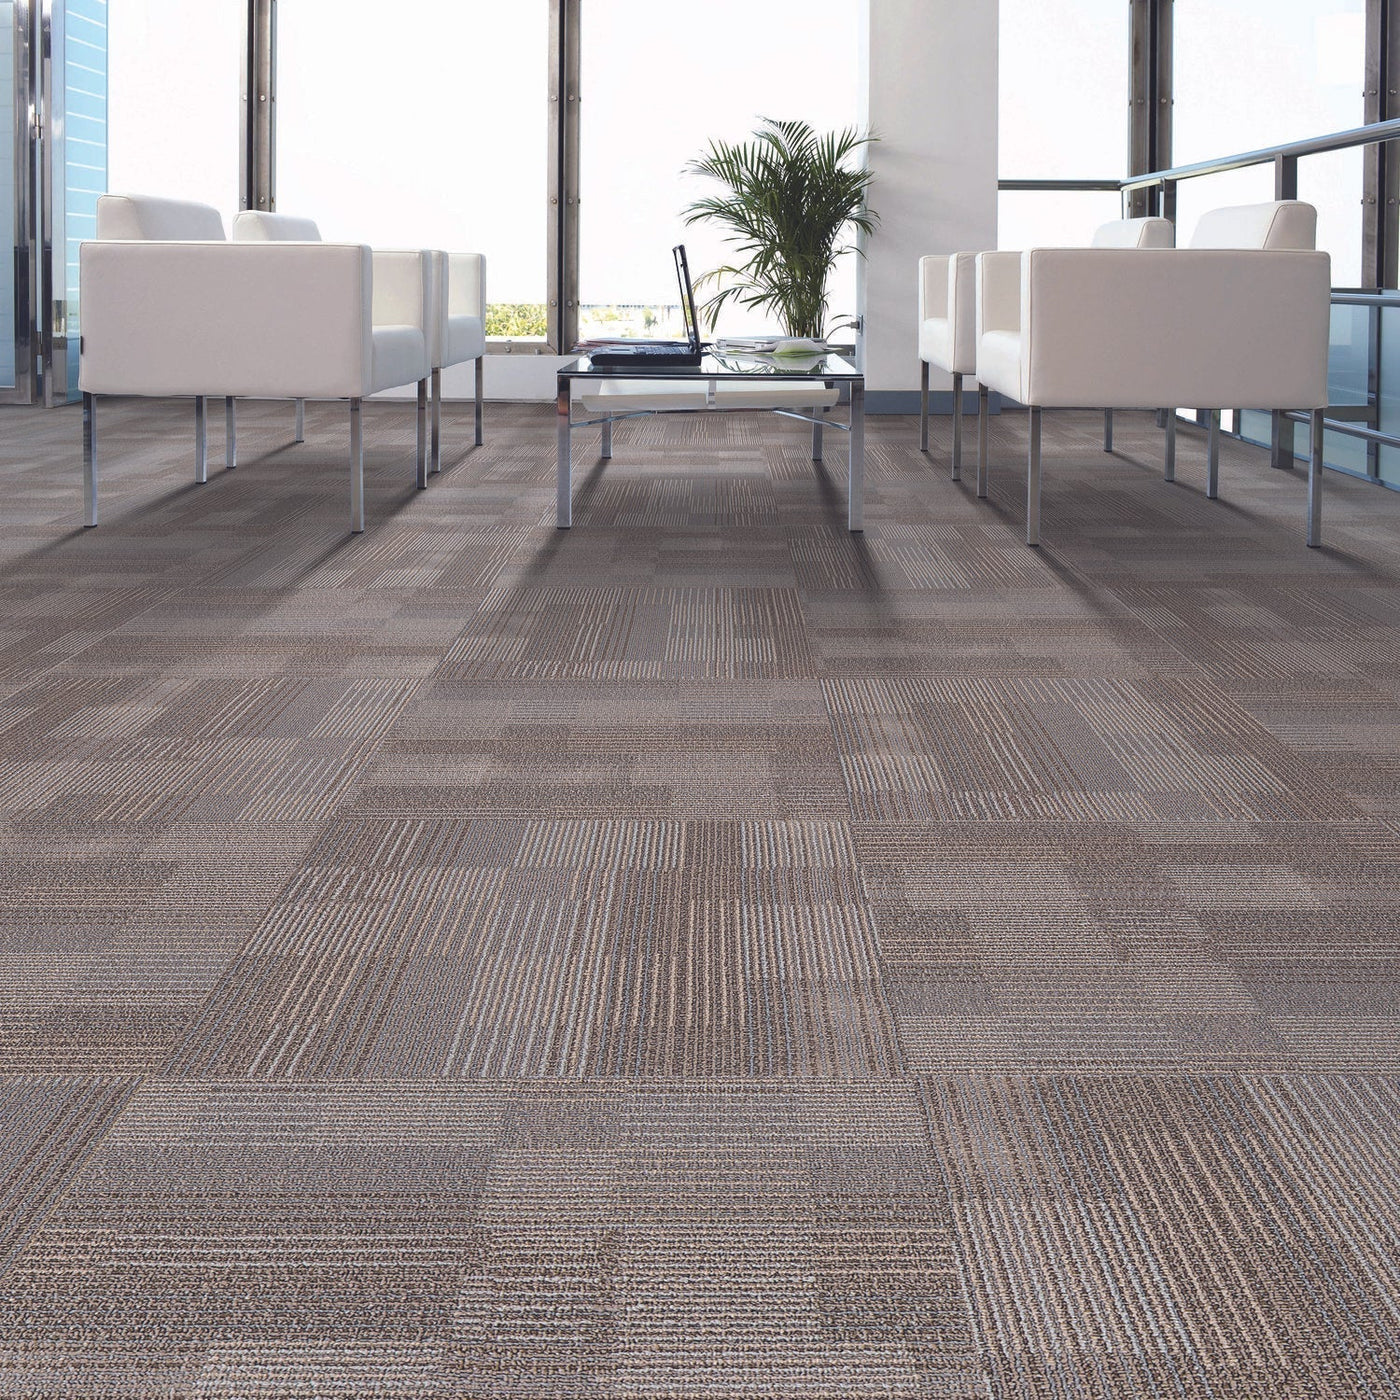 Matrexx Intuition 845 19.70" x 19.70" Night Mission Carpet Tile